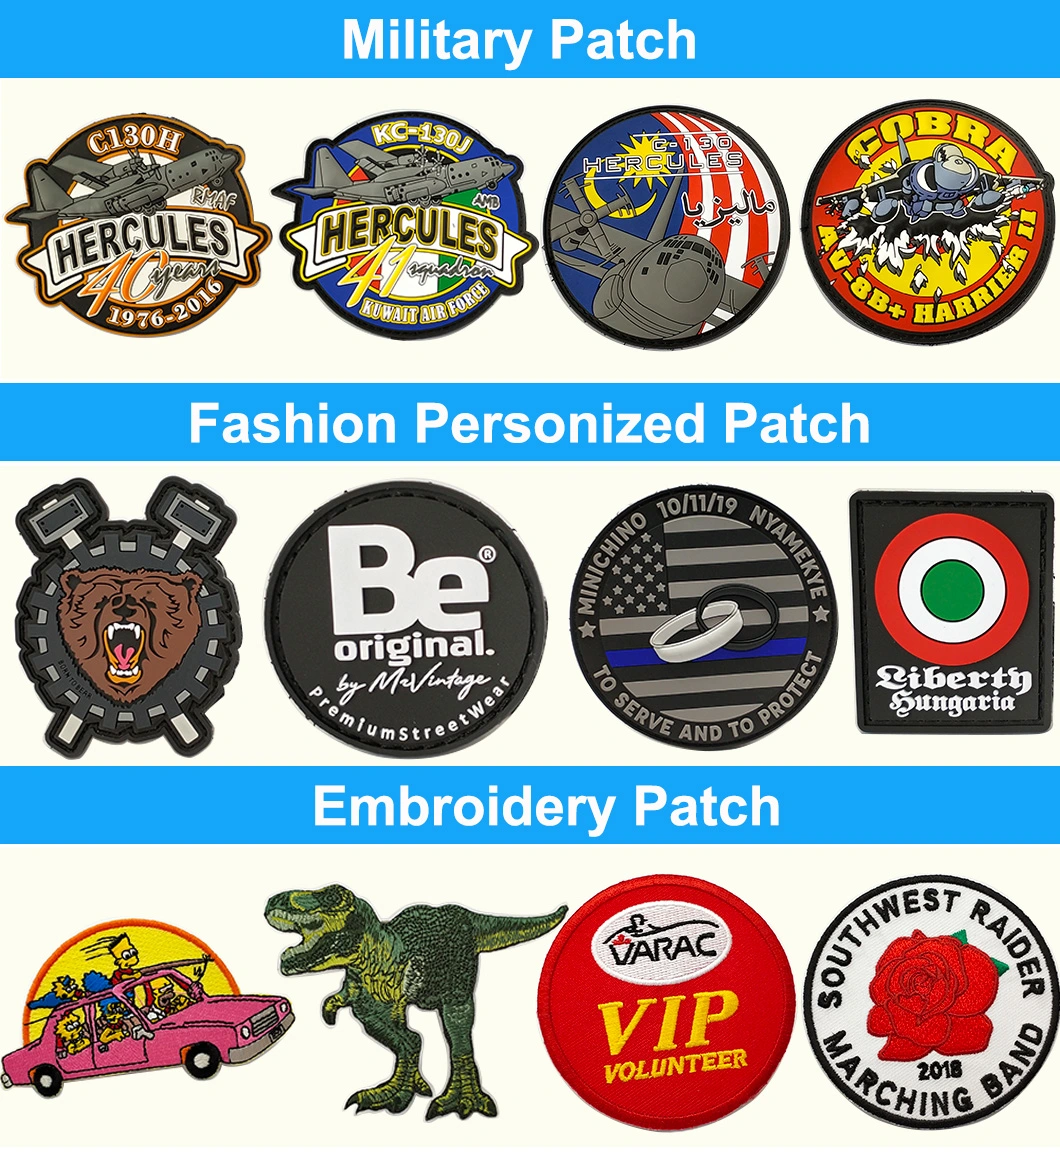 Custom Personalized Garment Accessories Woven Badge Fashion Shoes Hang Tag Sticker Cartoon Lion PVC Rubber Military Grenade Clothing Label Name Patches in China